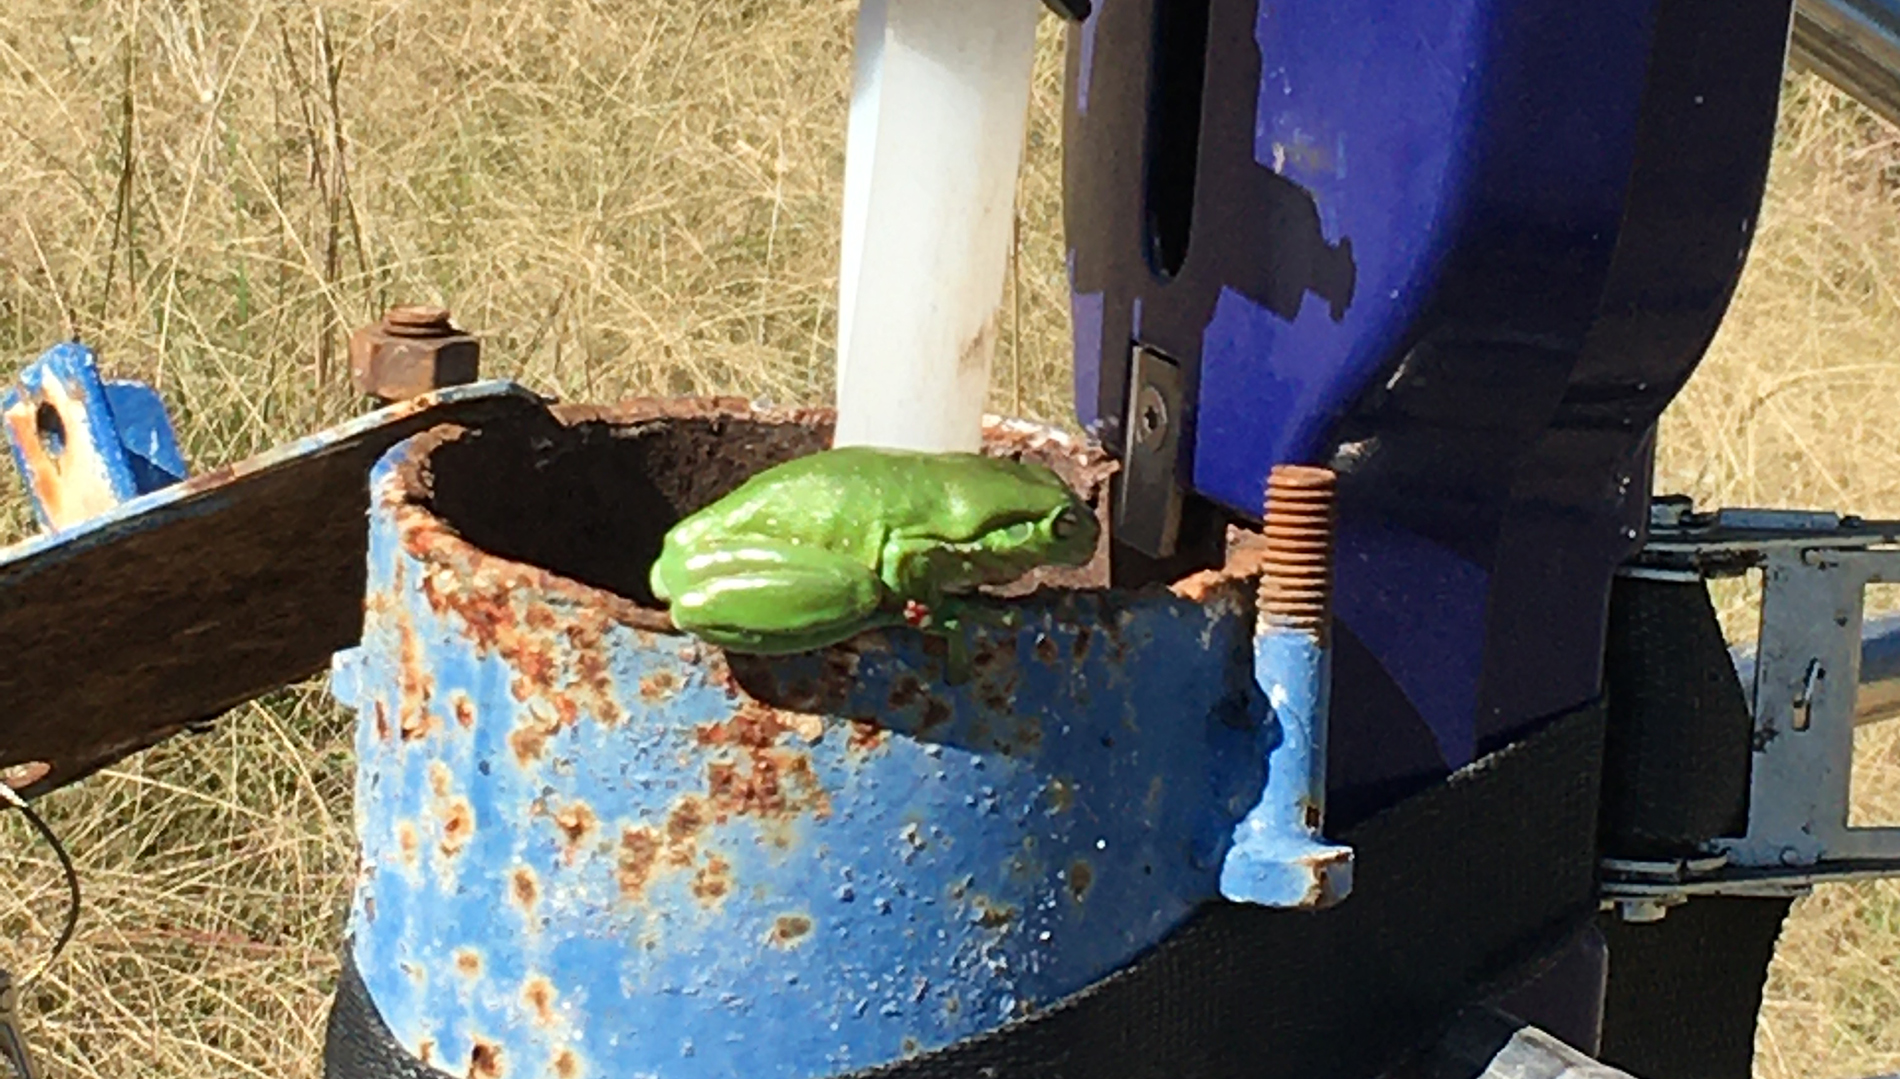 Making use of available habitat. Frogs are a common occurrence within groundwater bores. Photo taken at a site near Boggabri, Namoi Catchment whilst measuring water quality. Photo: Jodie Dabovic (DPE Water/Macquarie University 2022).